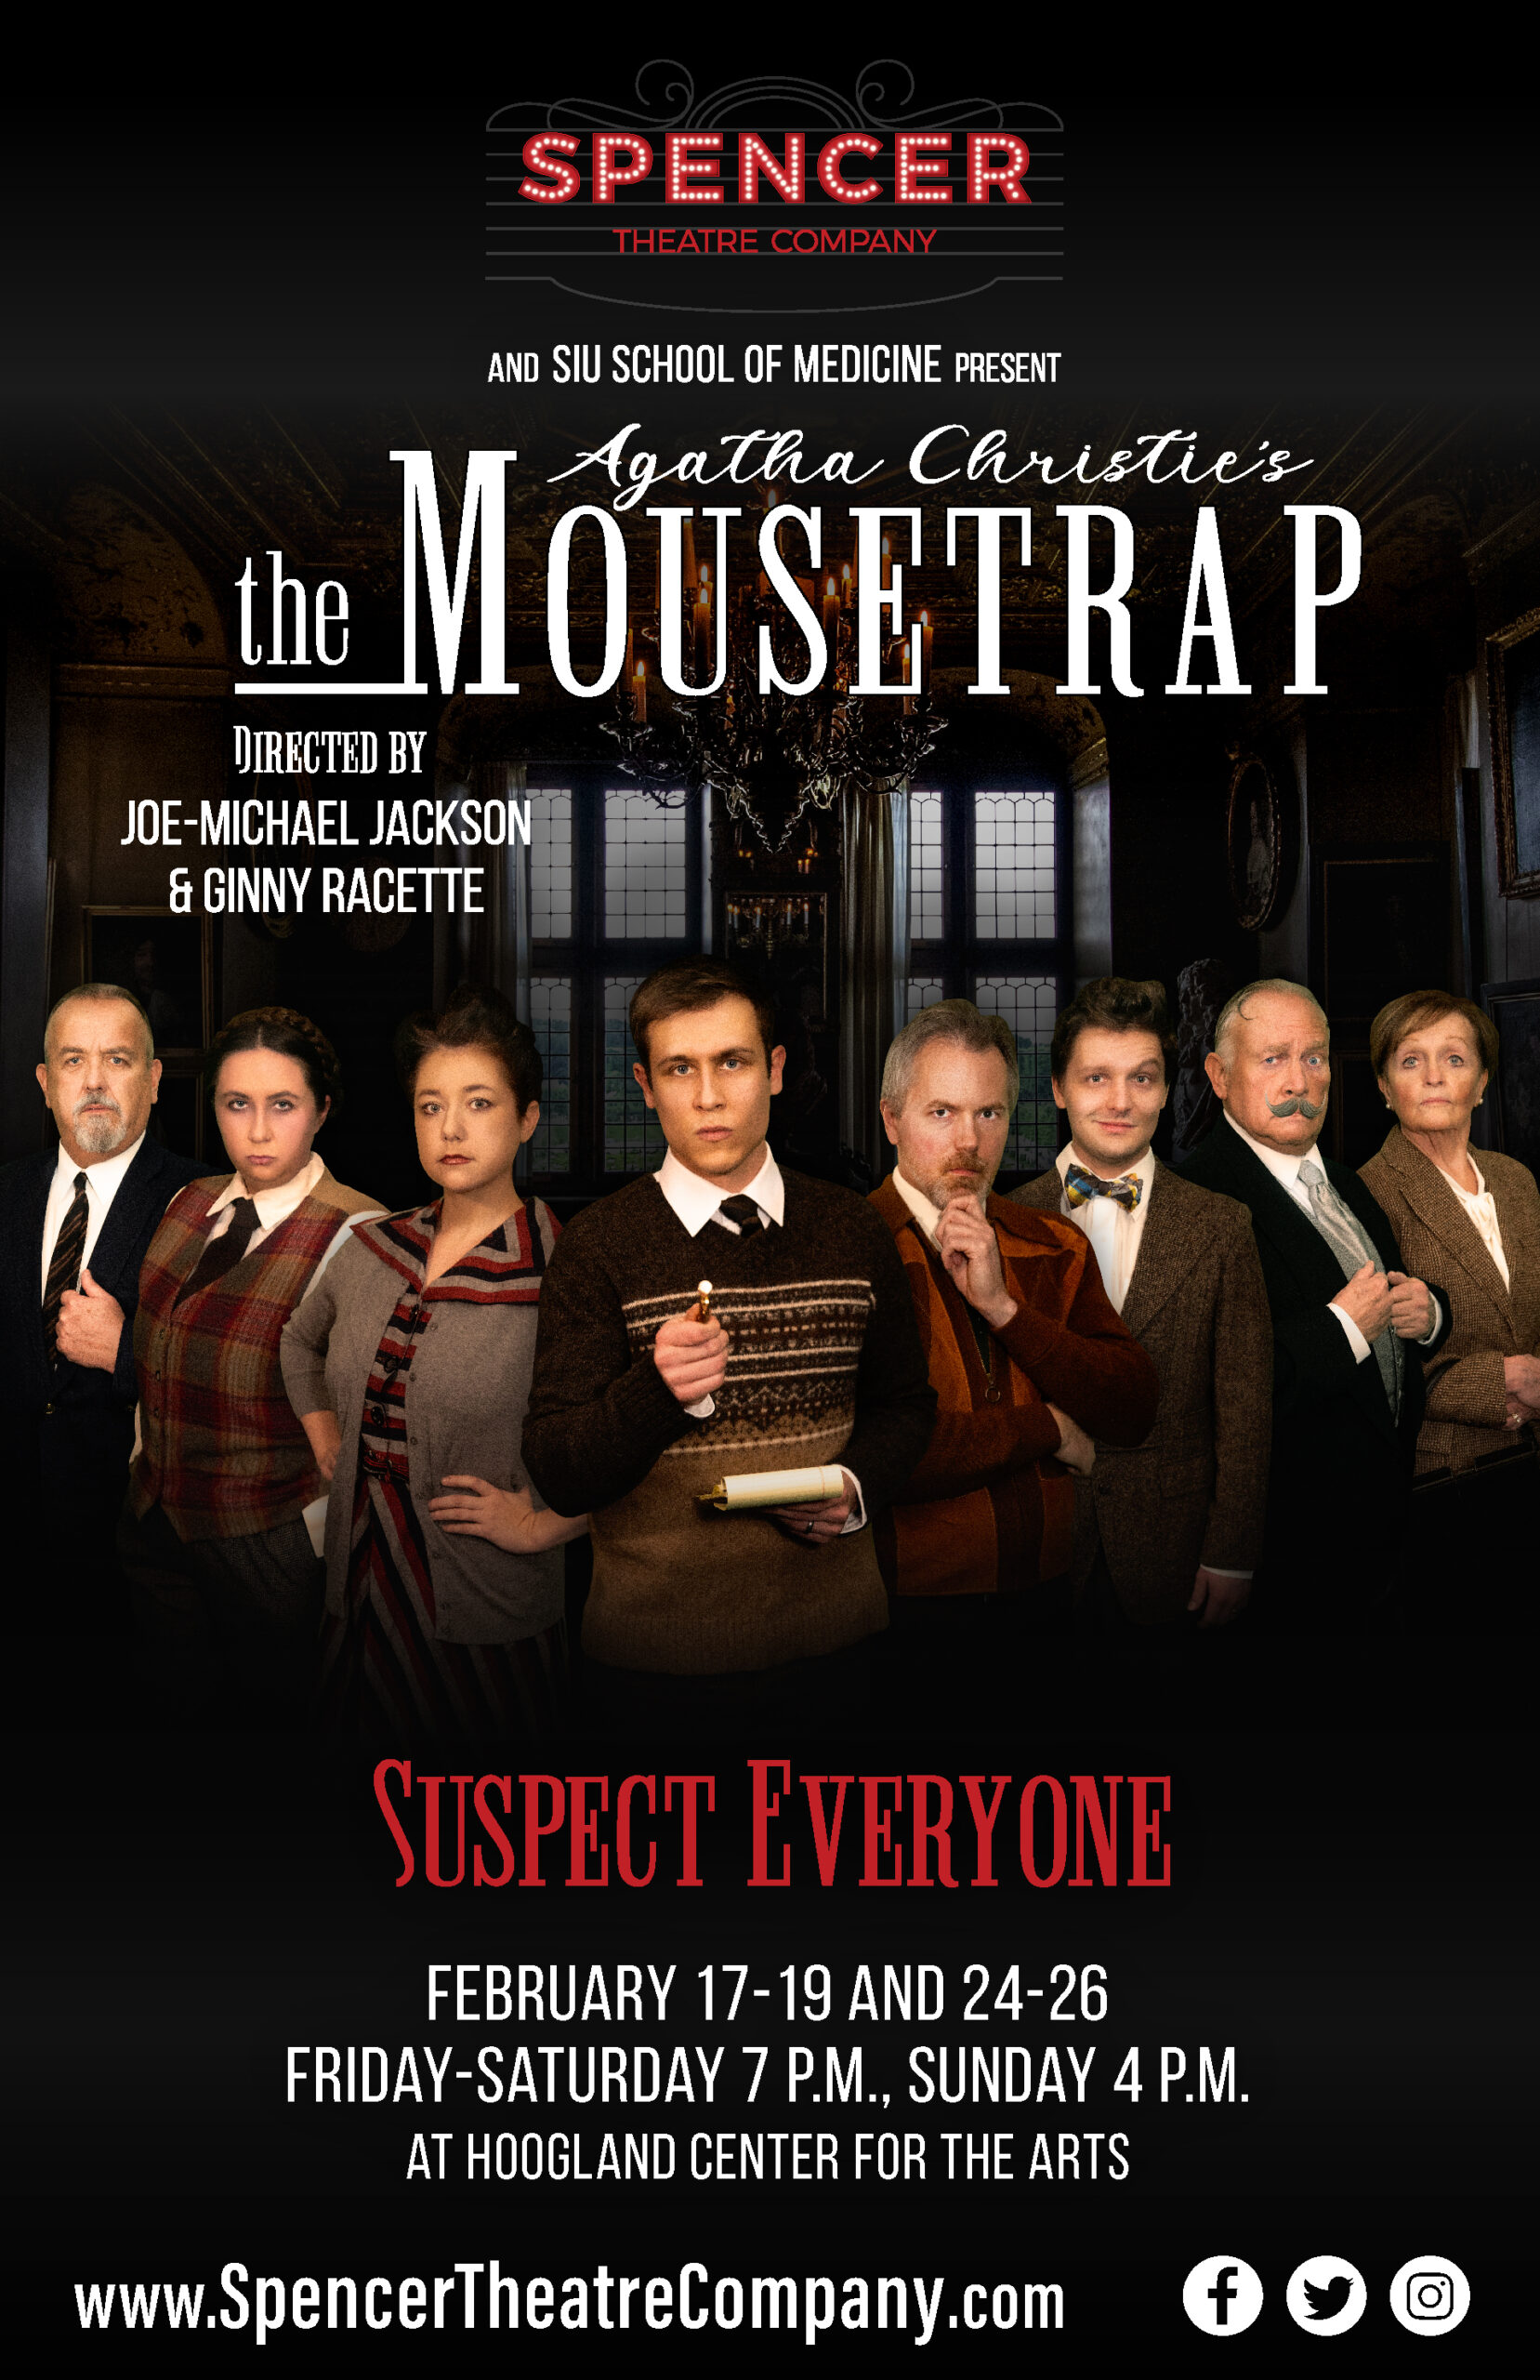 Agatha Christie's The Mousetrap February 17-26, 2023